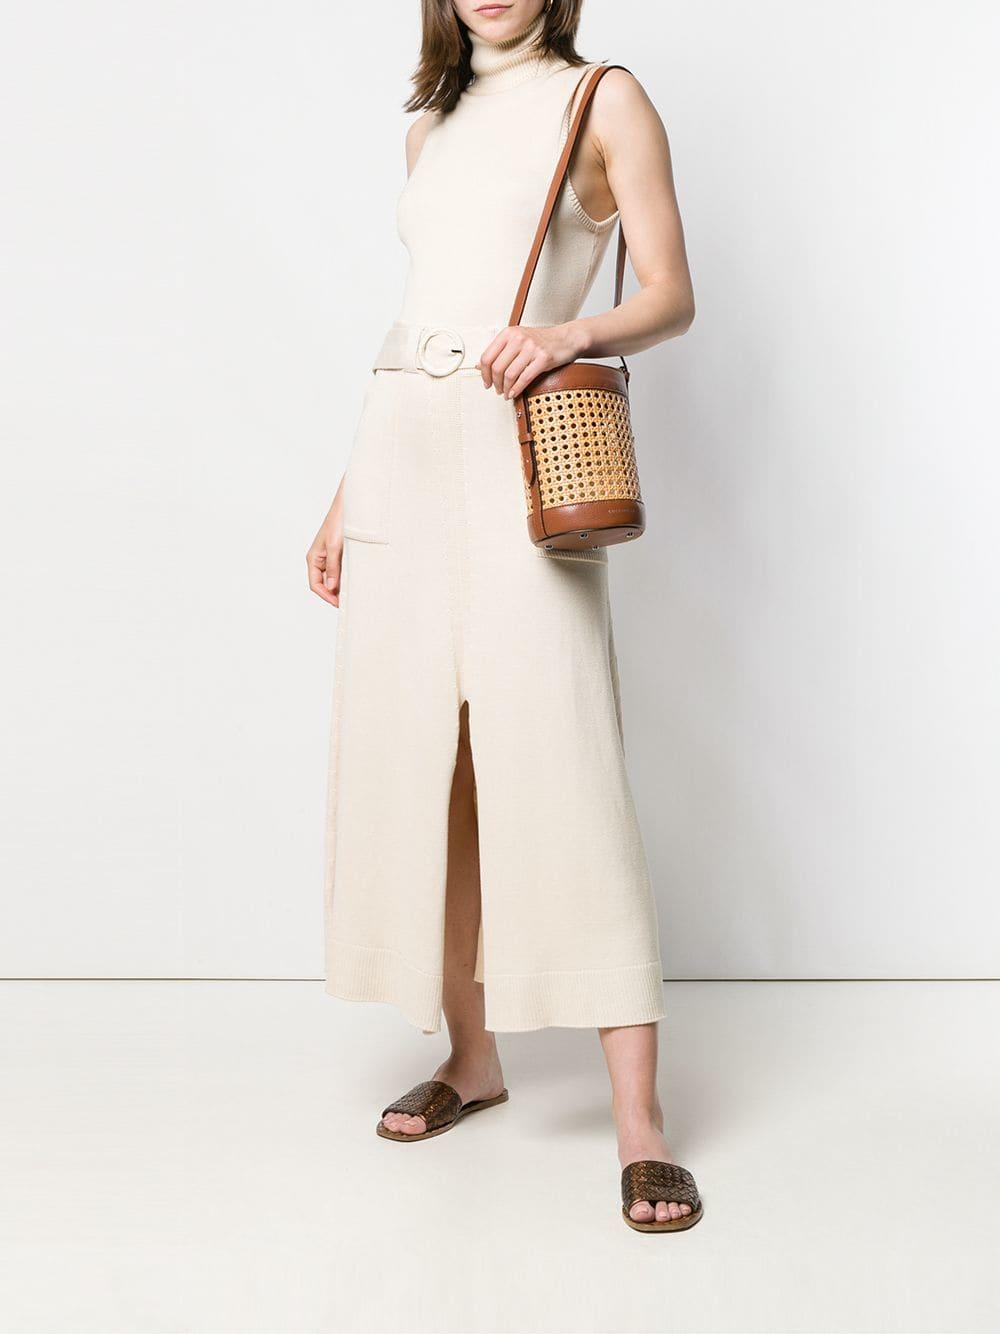 Coccinelle Woven Bucket Bag | Lyst